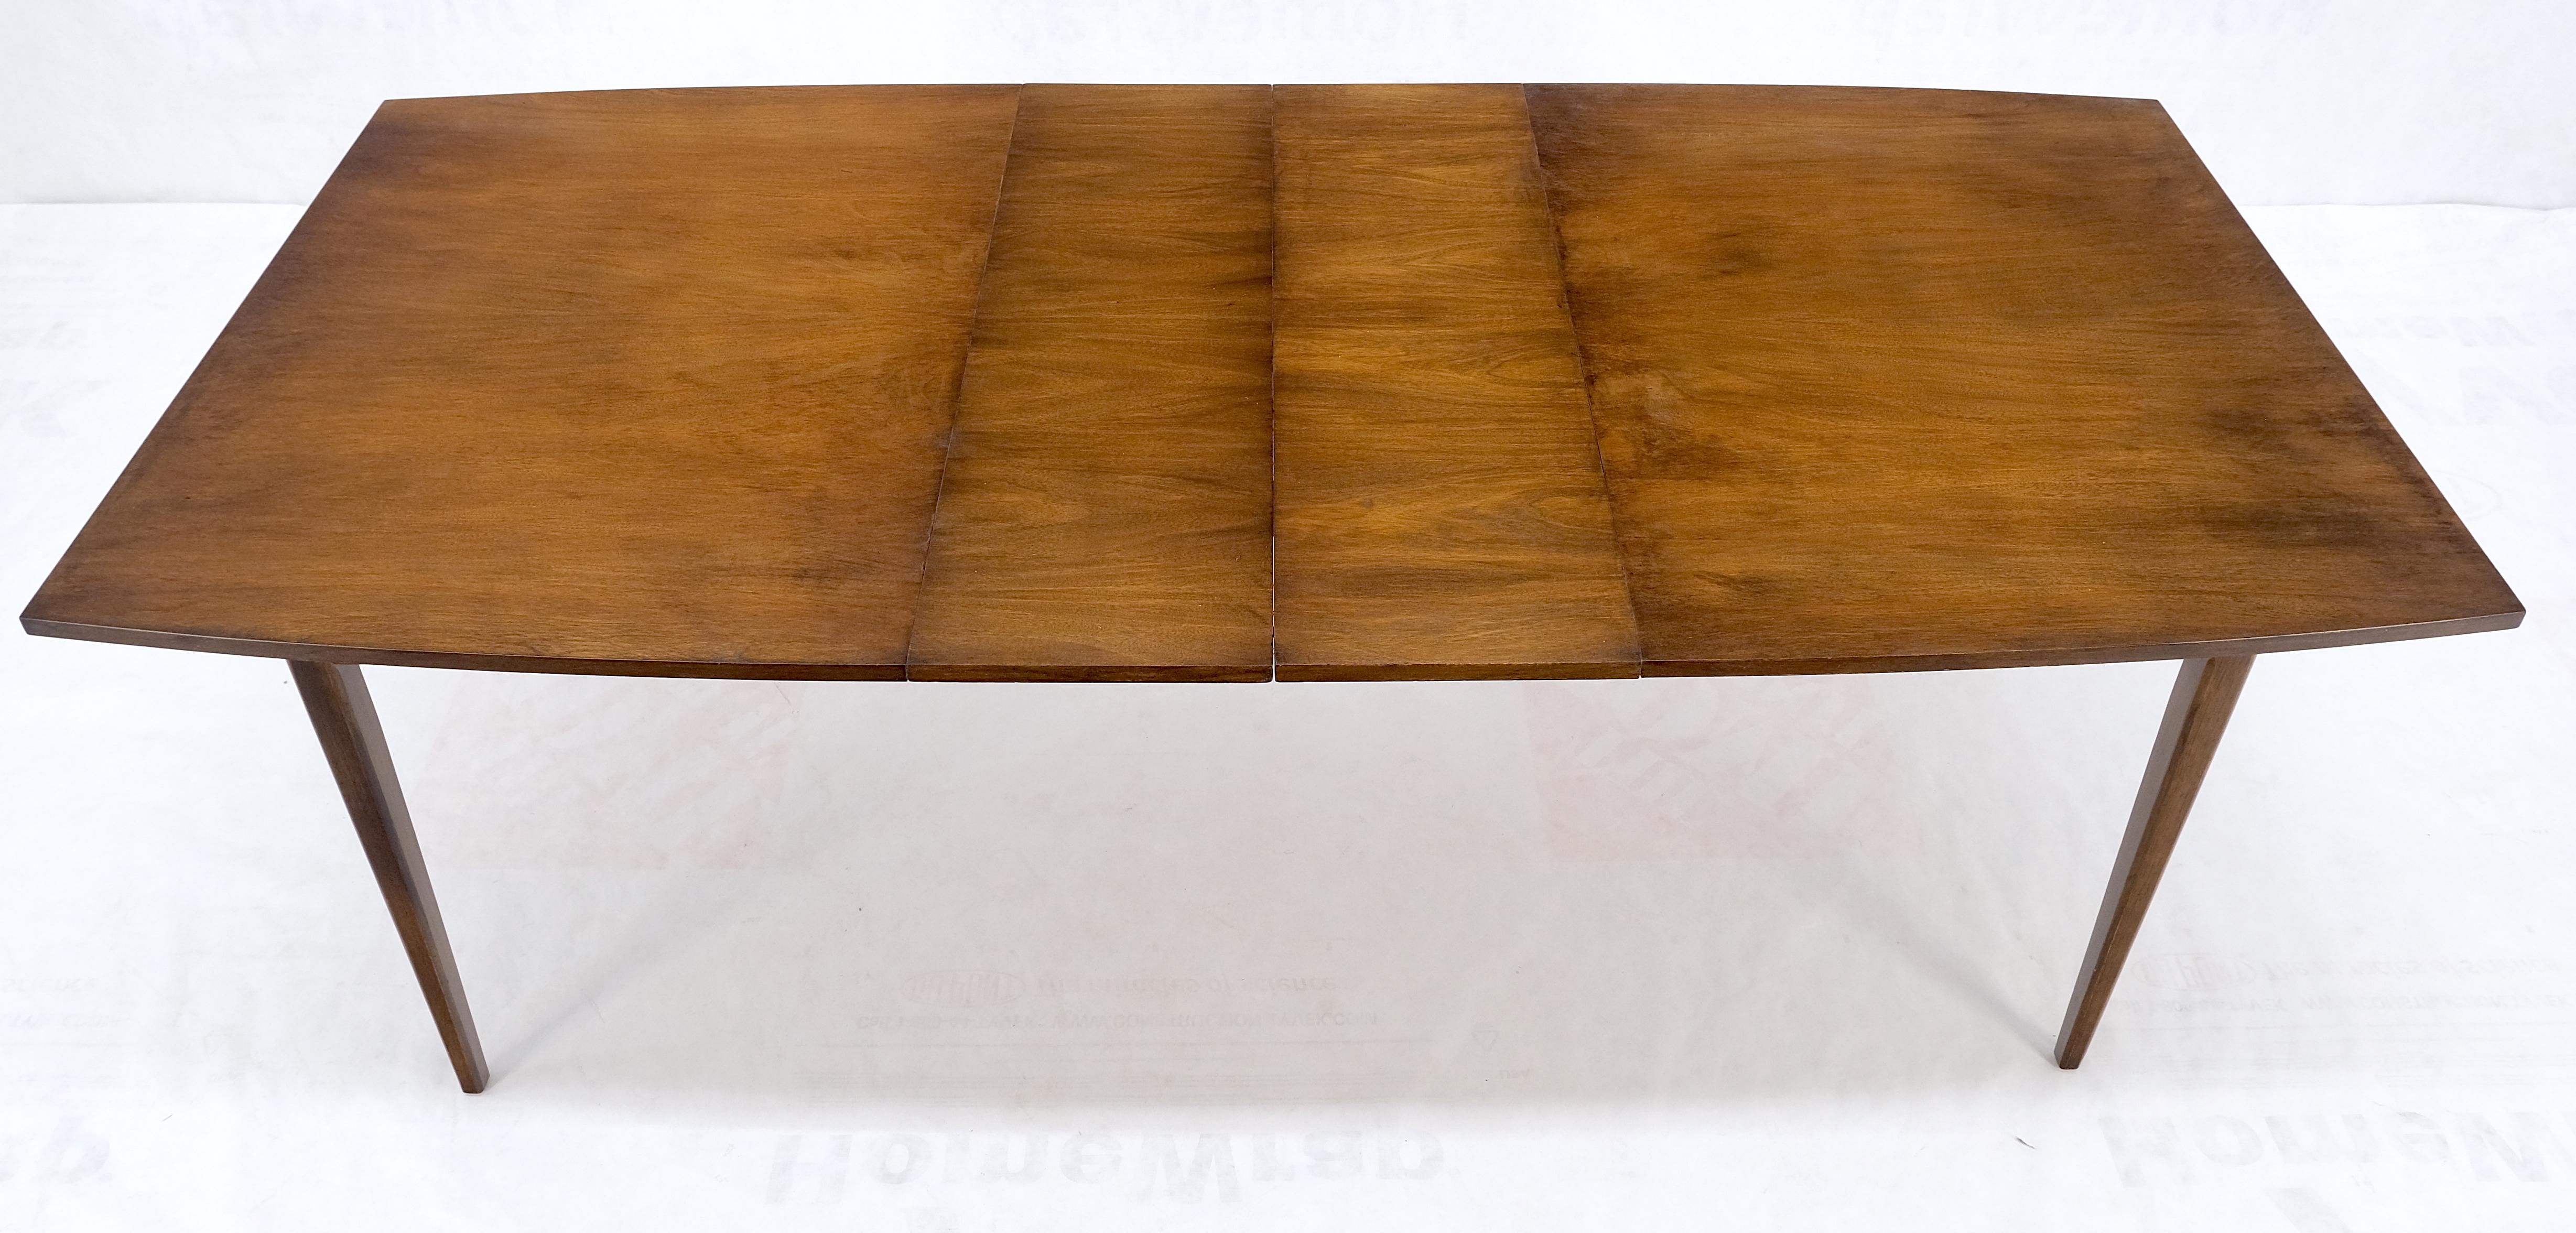 American Walnut Danish Mid Century Modern Style Dining Table 2 Extension Boards  For Sale 3